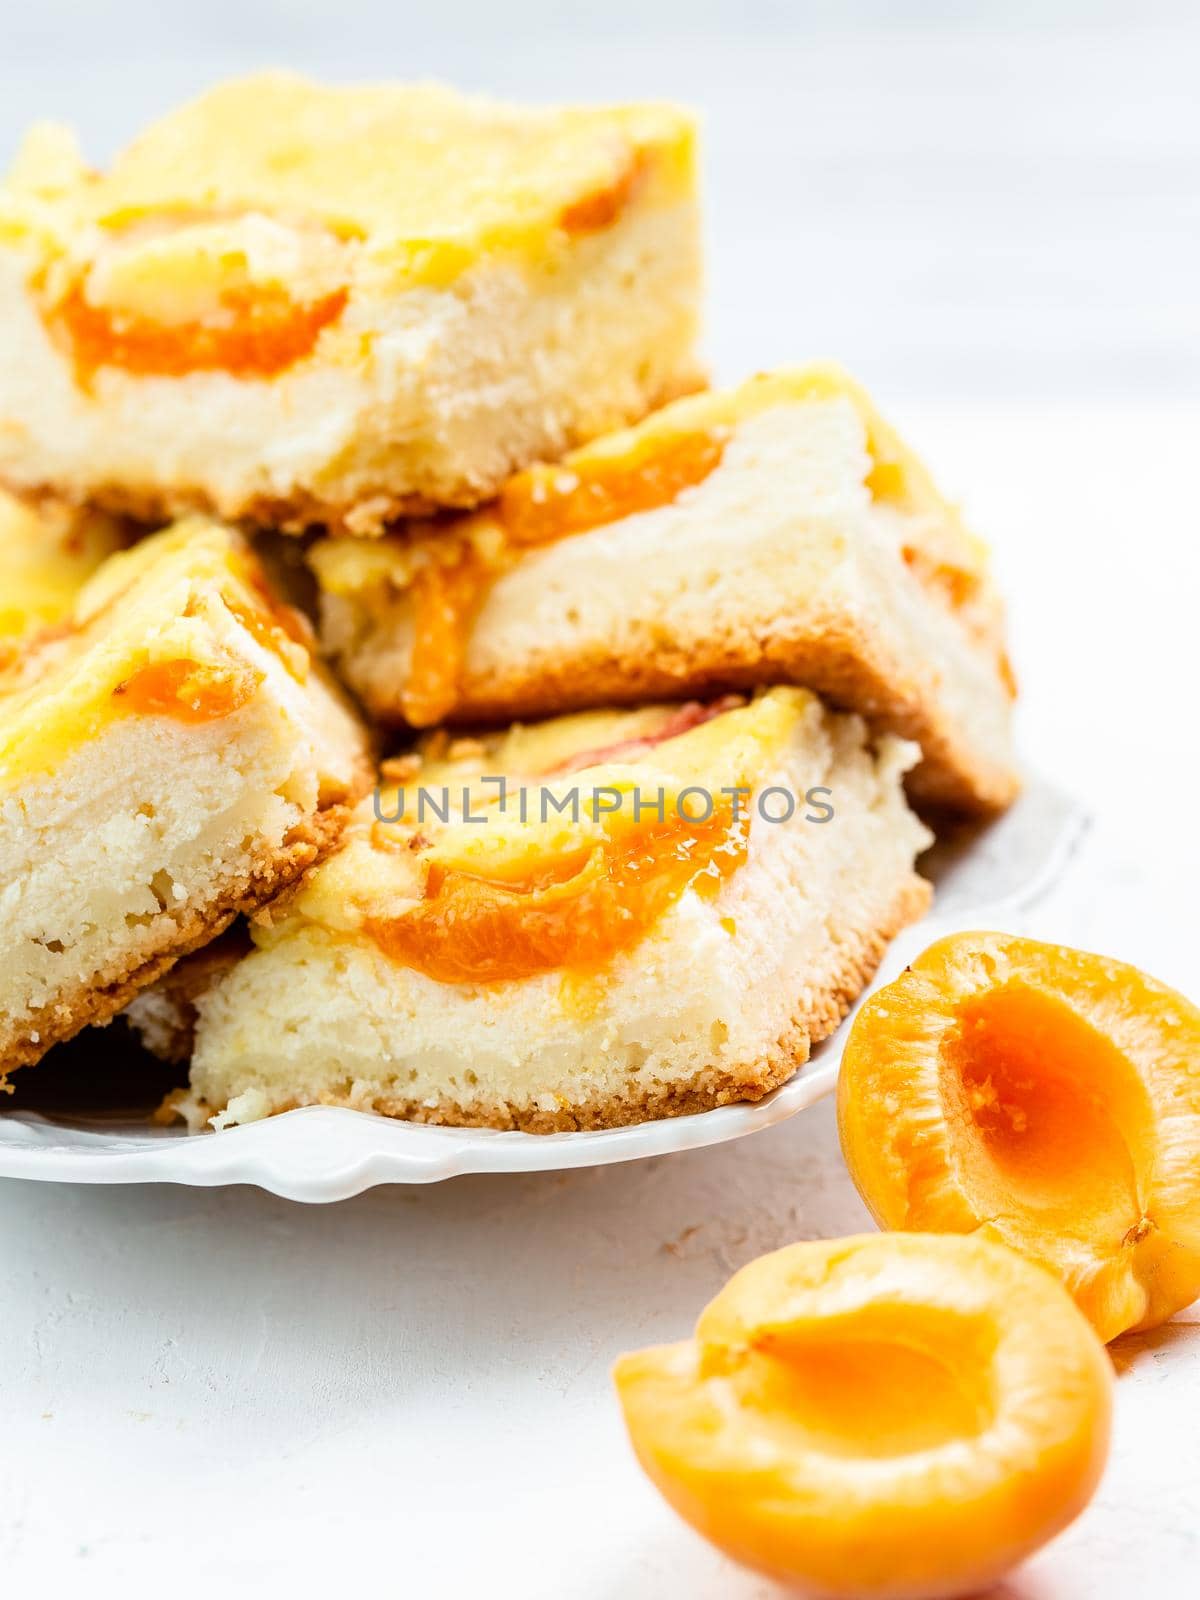 Slice of fresh baked apricot and cheese tart dessert